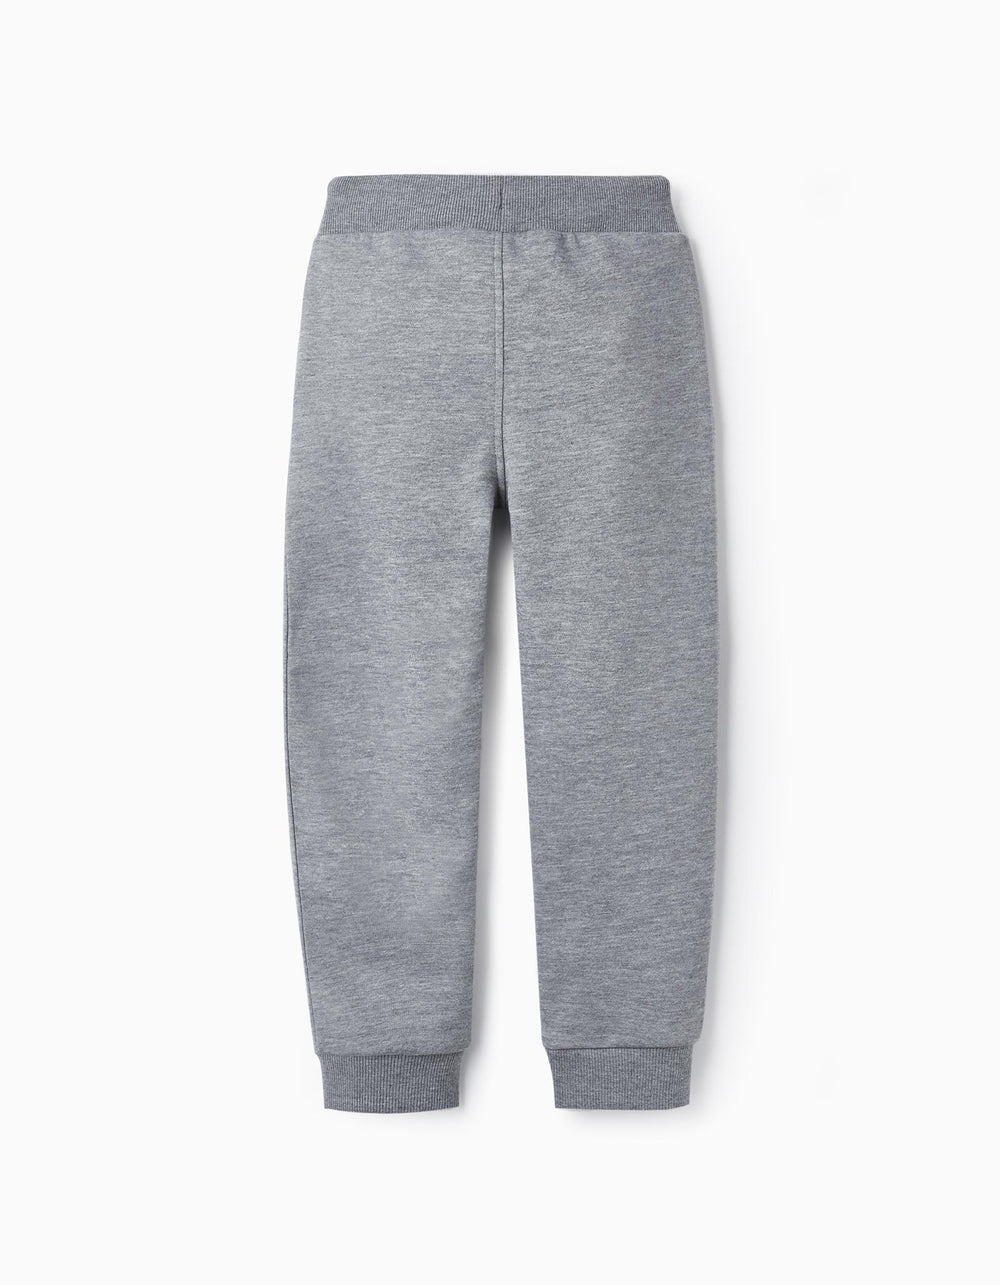 Joggers for Boys 'Different Together', Grey